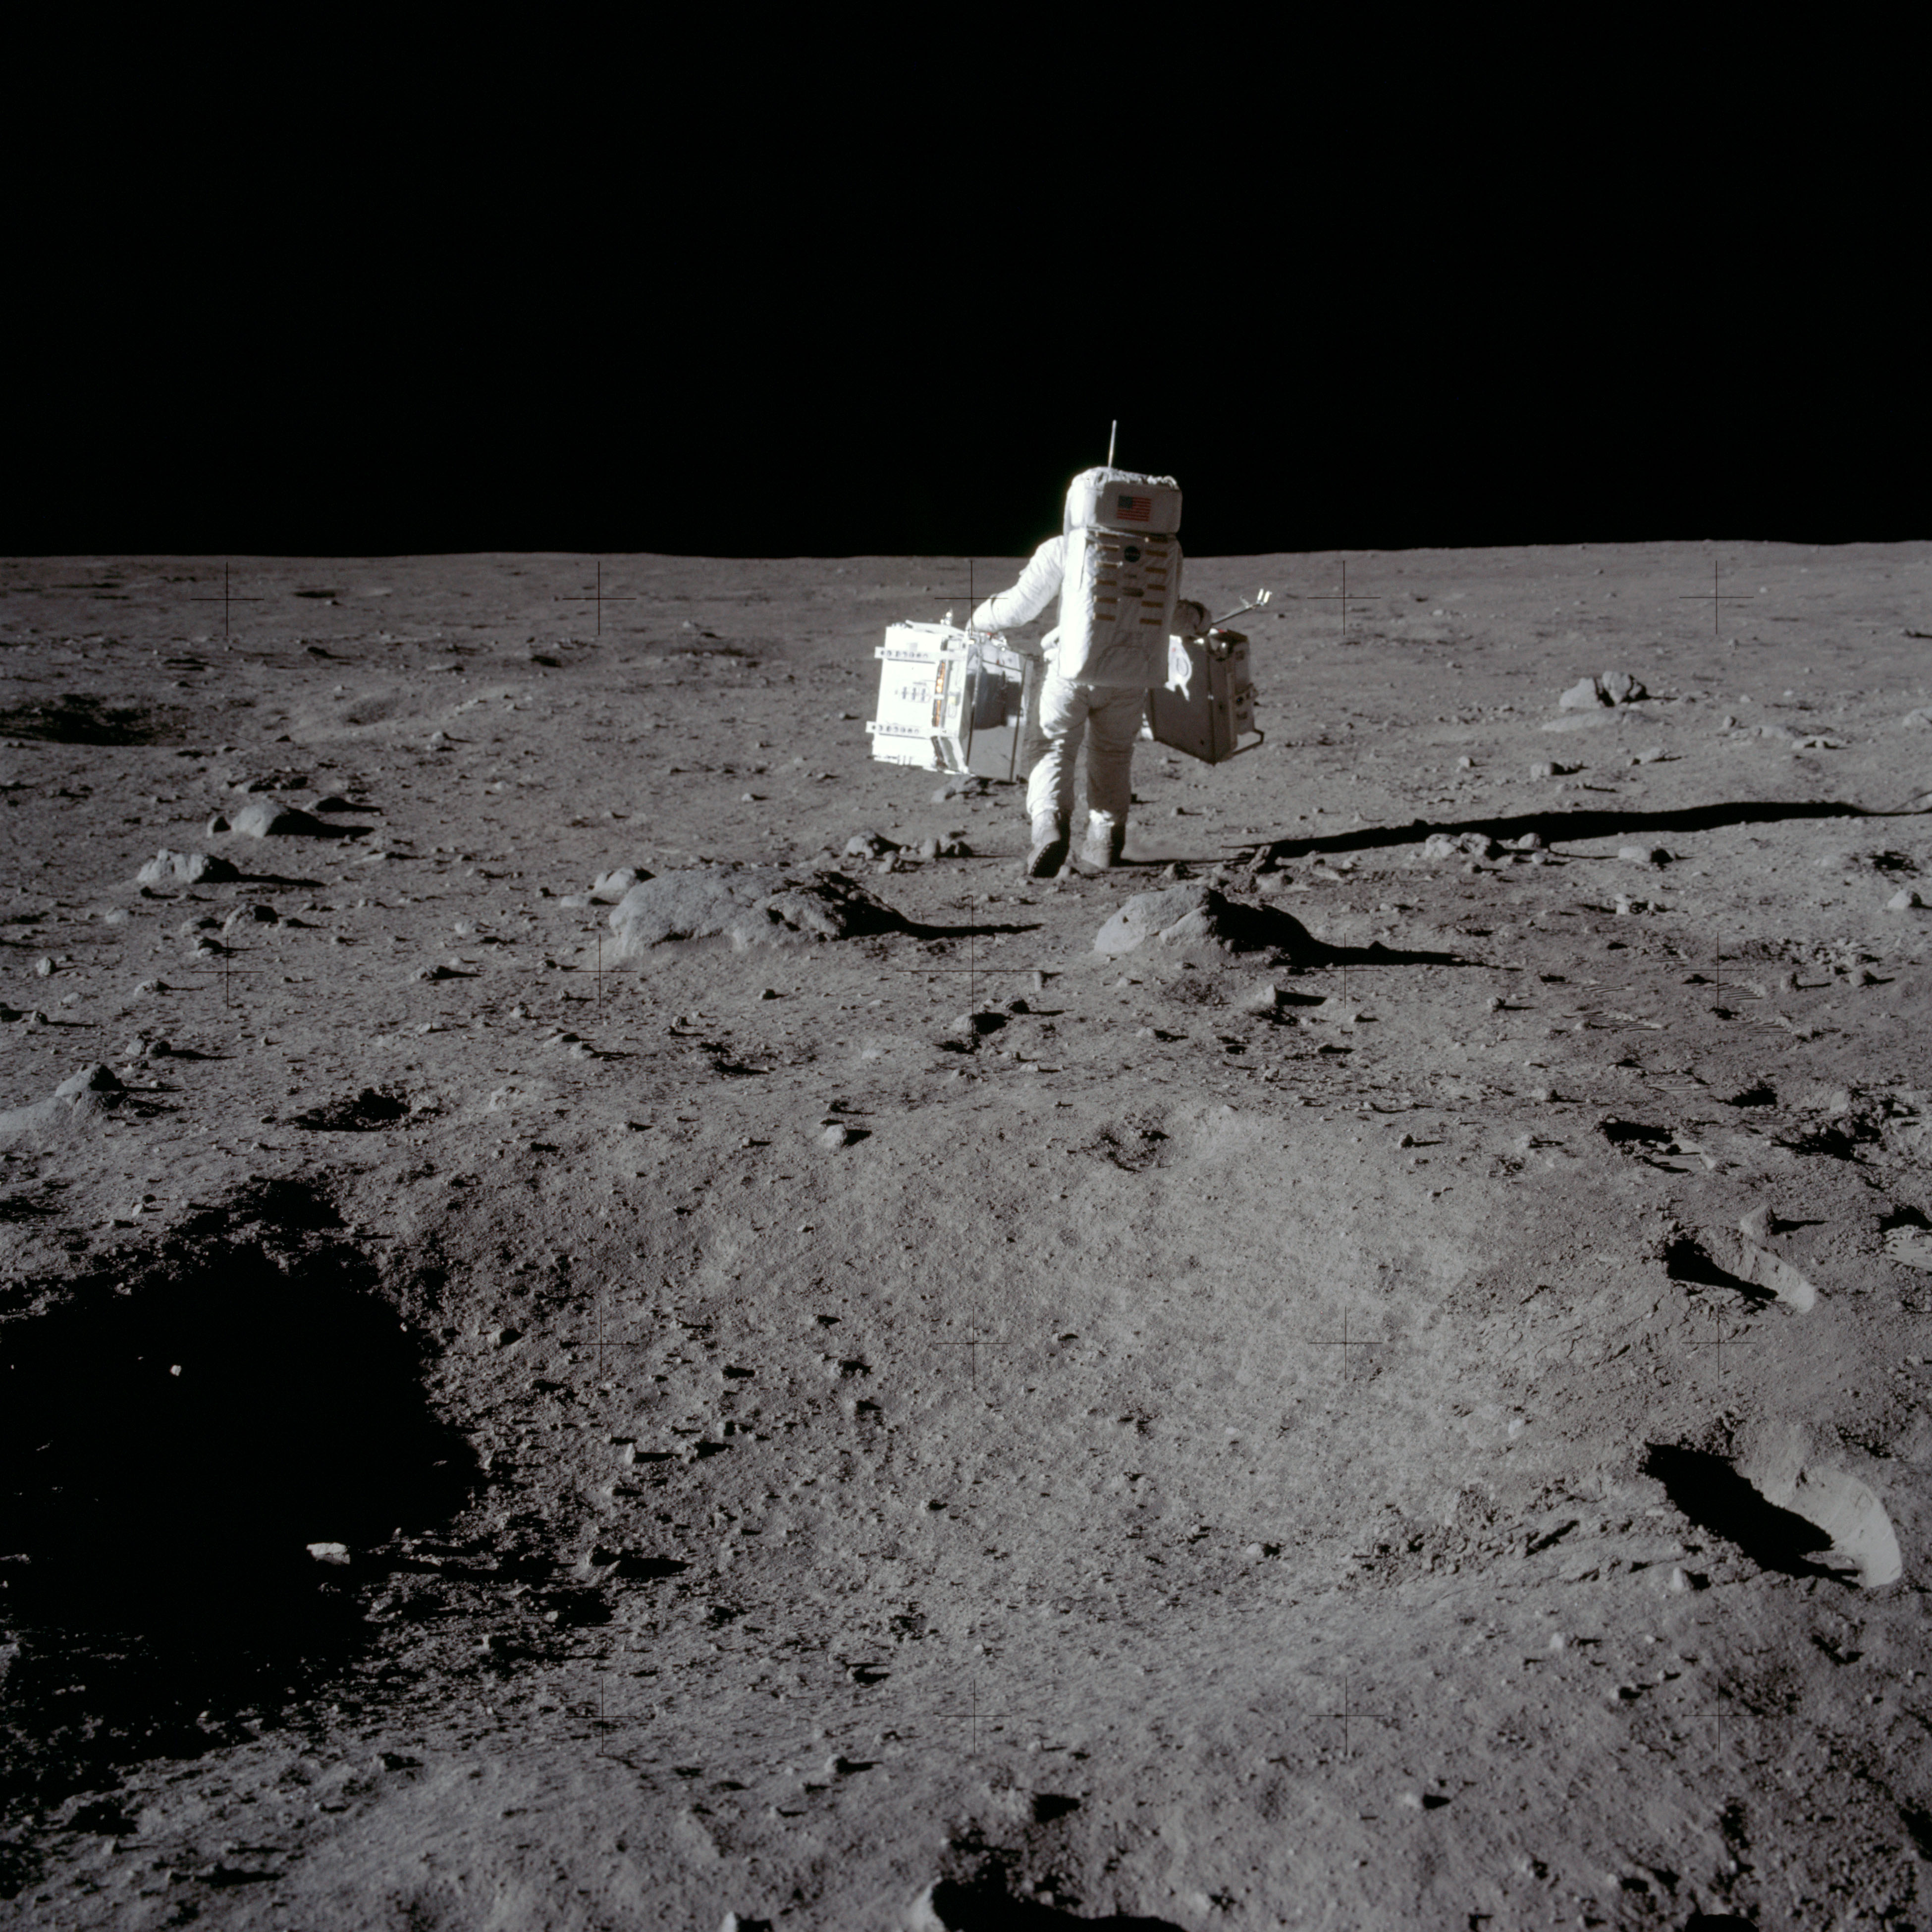 Apollo 11’s ‘one small step’ sparked a new rush to reach the Moon